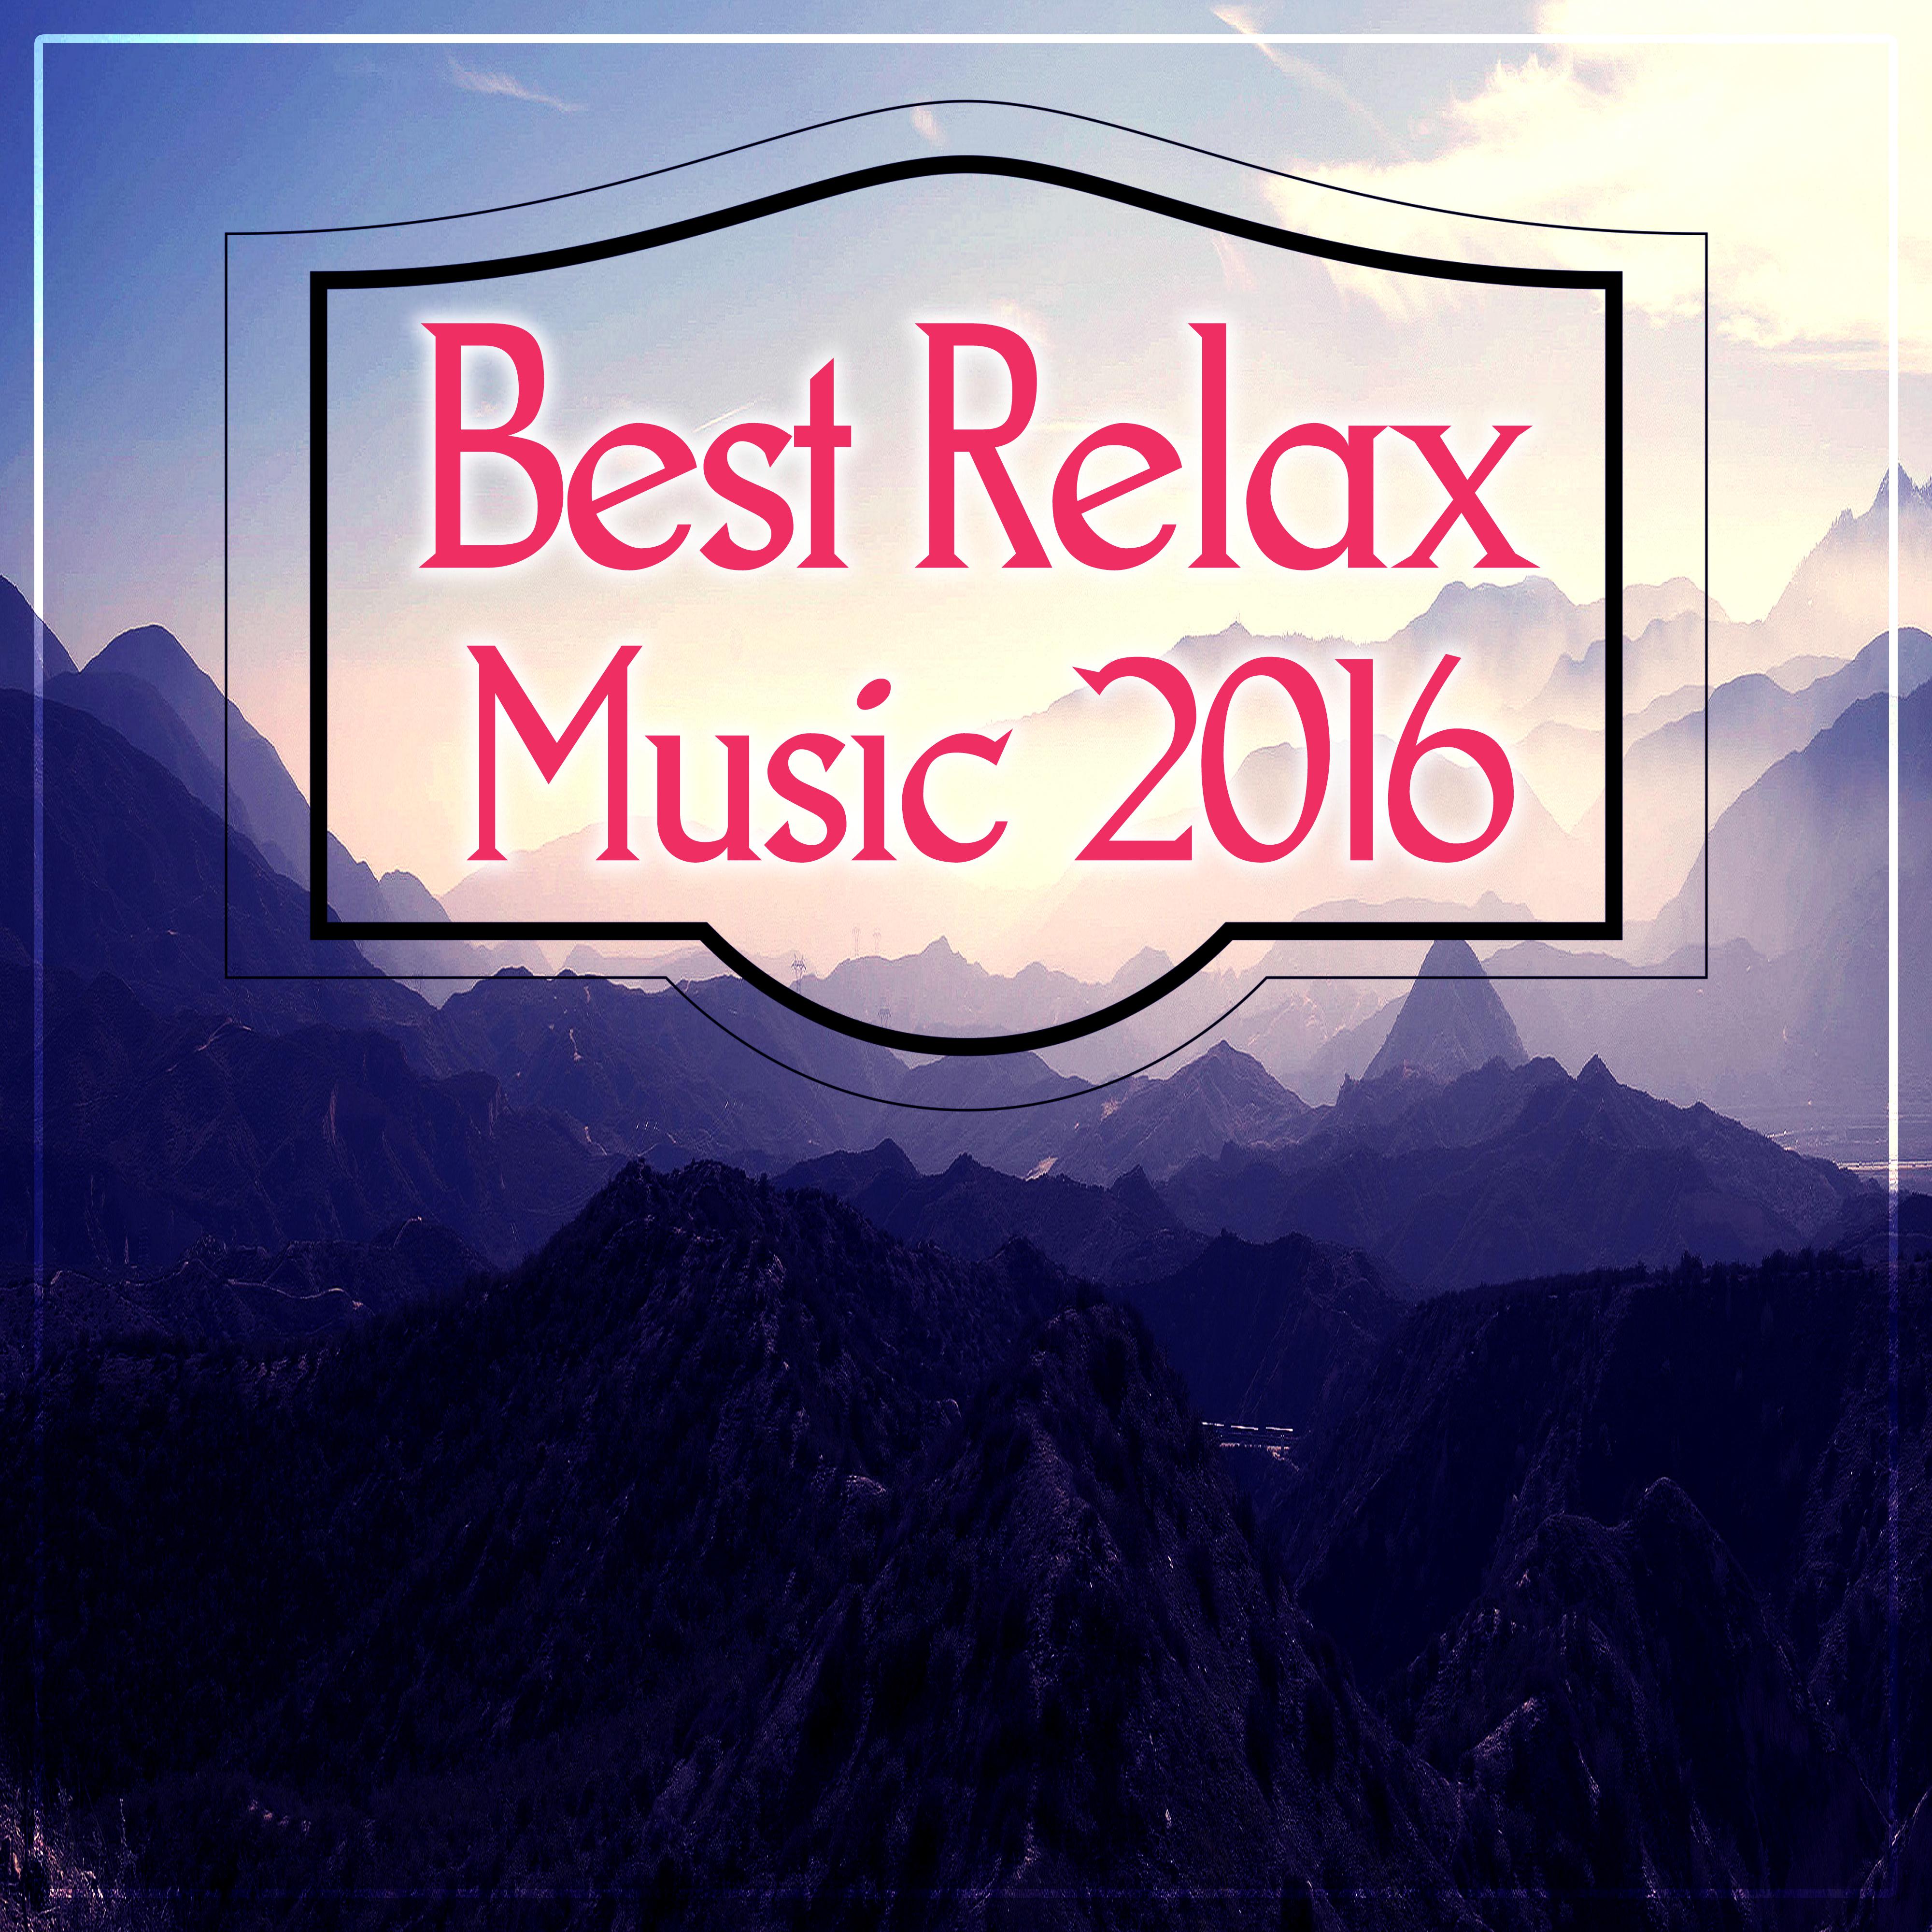 Best Relax Music 2016  Nature Sounds for Bath Relaxation, Background Music for SPA, Free Time  Rest, New Age Music